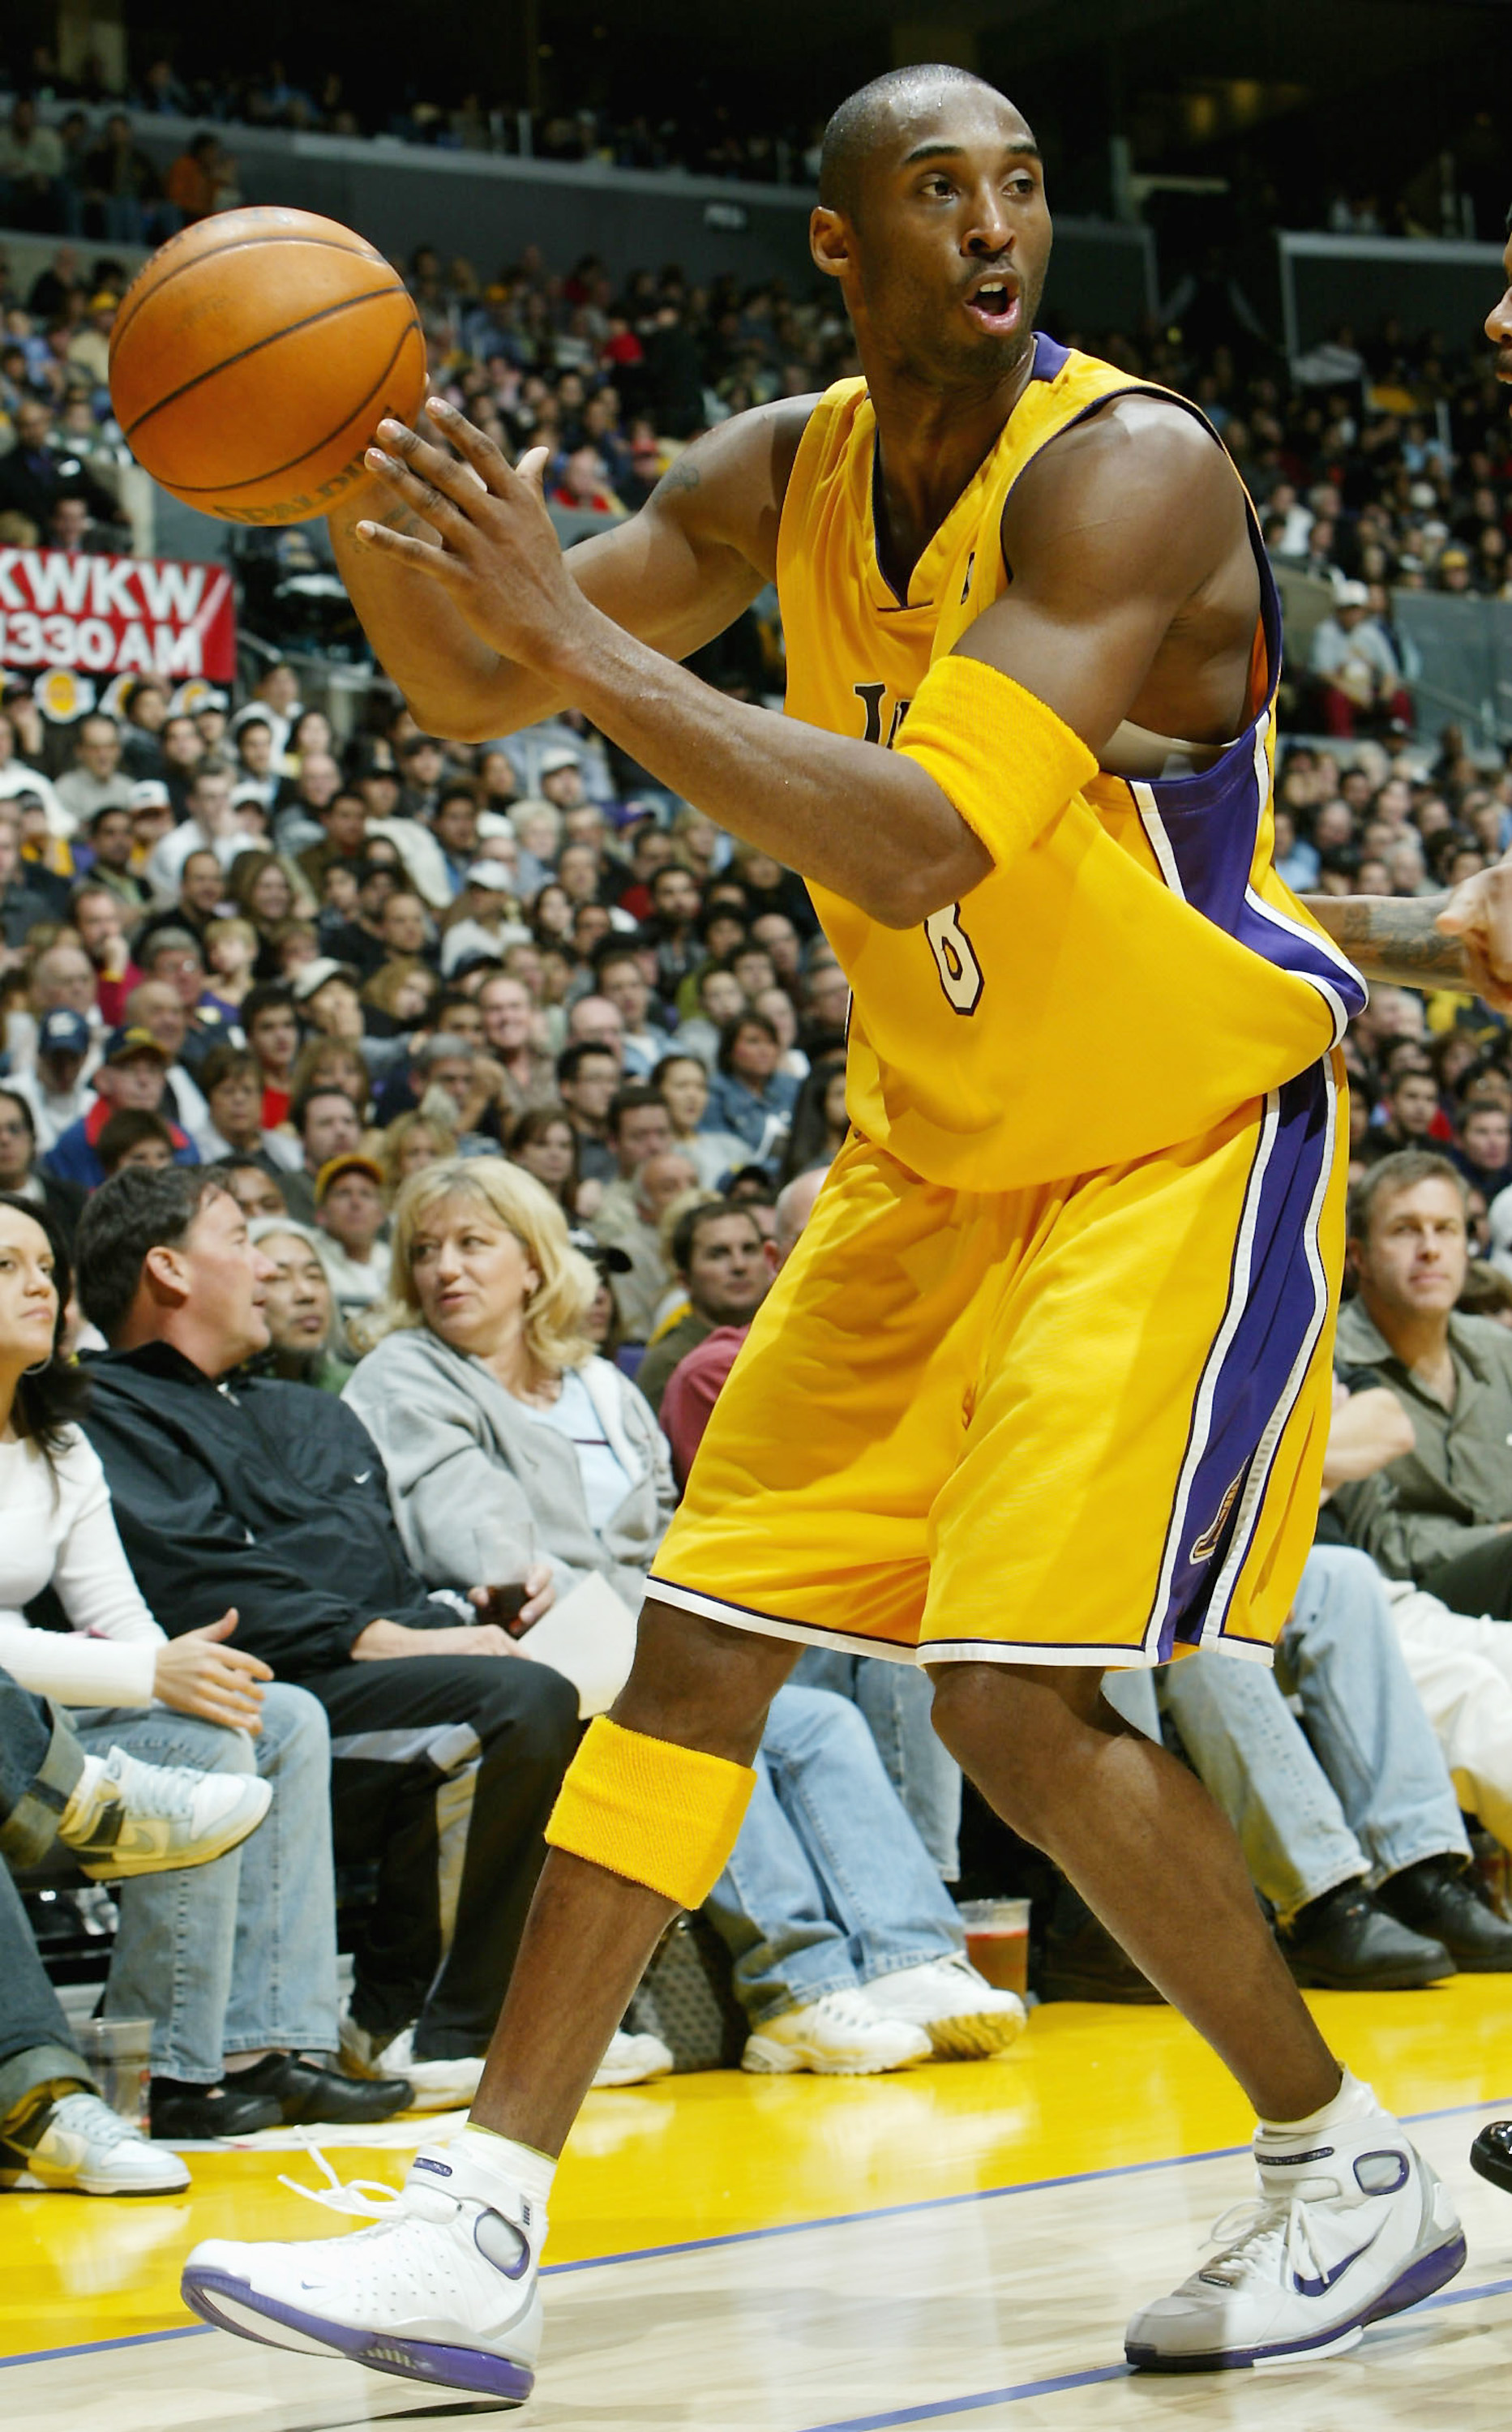 LOS ANGELES - DECEMBER 28: Kobe Bryant #8 of the Los Angeles Lakers looks to move the ball against the Toronto Raptors on December 28, 2004 at Staples Center in Los Angeles, California. The Lakers won 117-99.  NOTE TO USER: User expressly acknowledges and